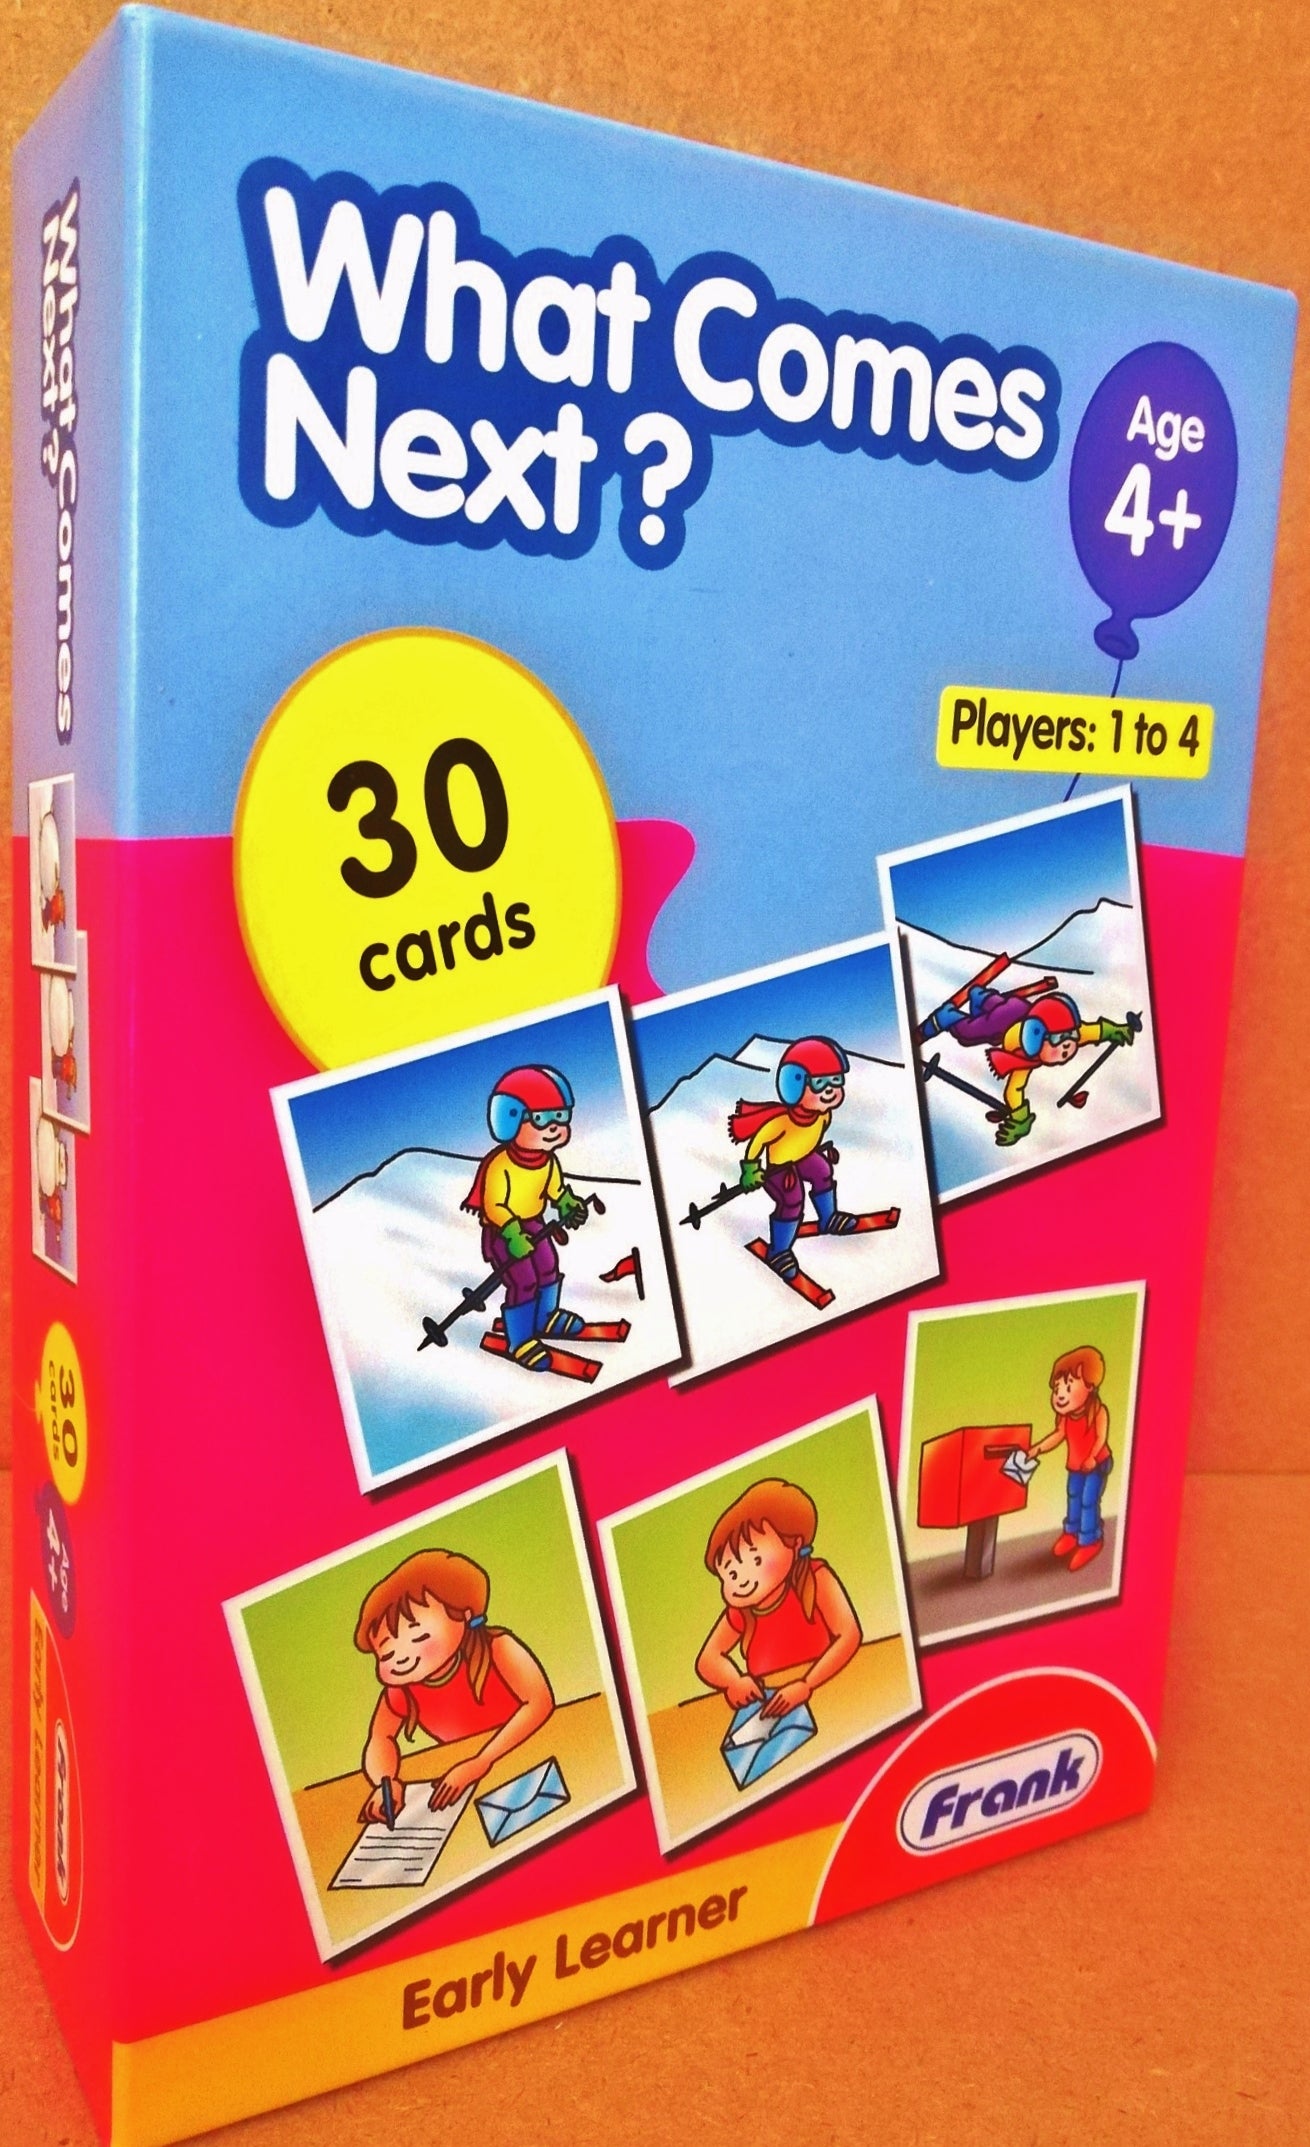 What Comes Next? Edunation South Africa Educational Games